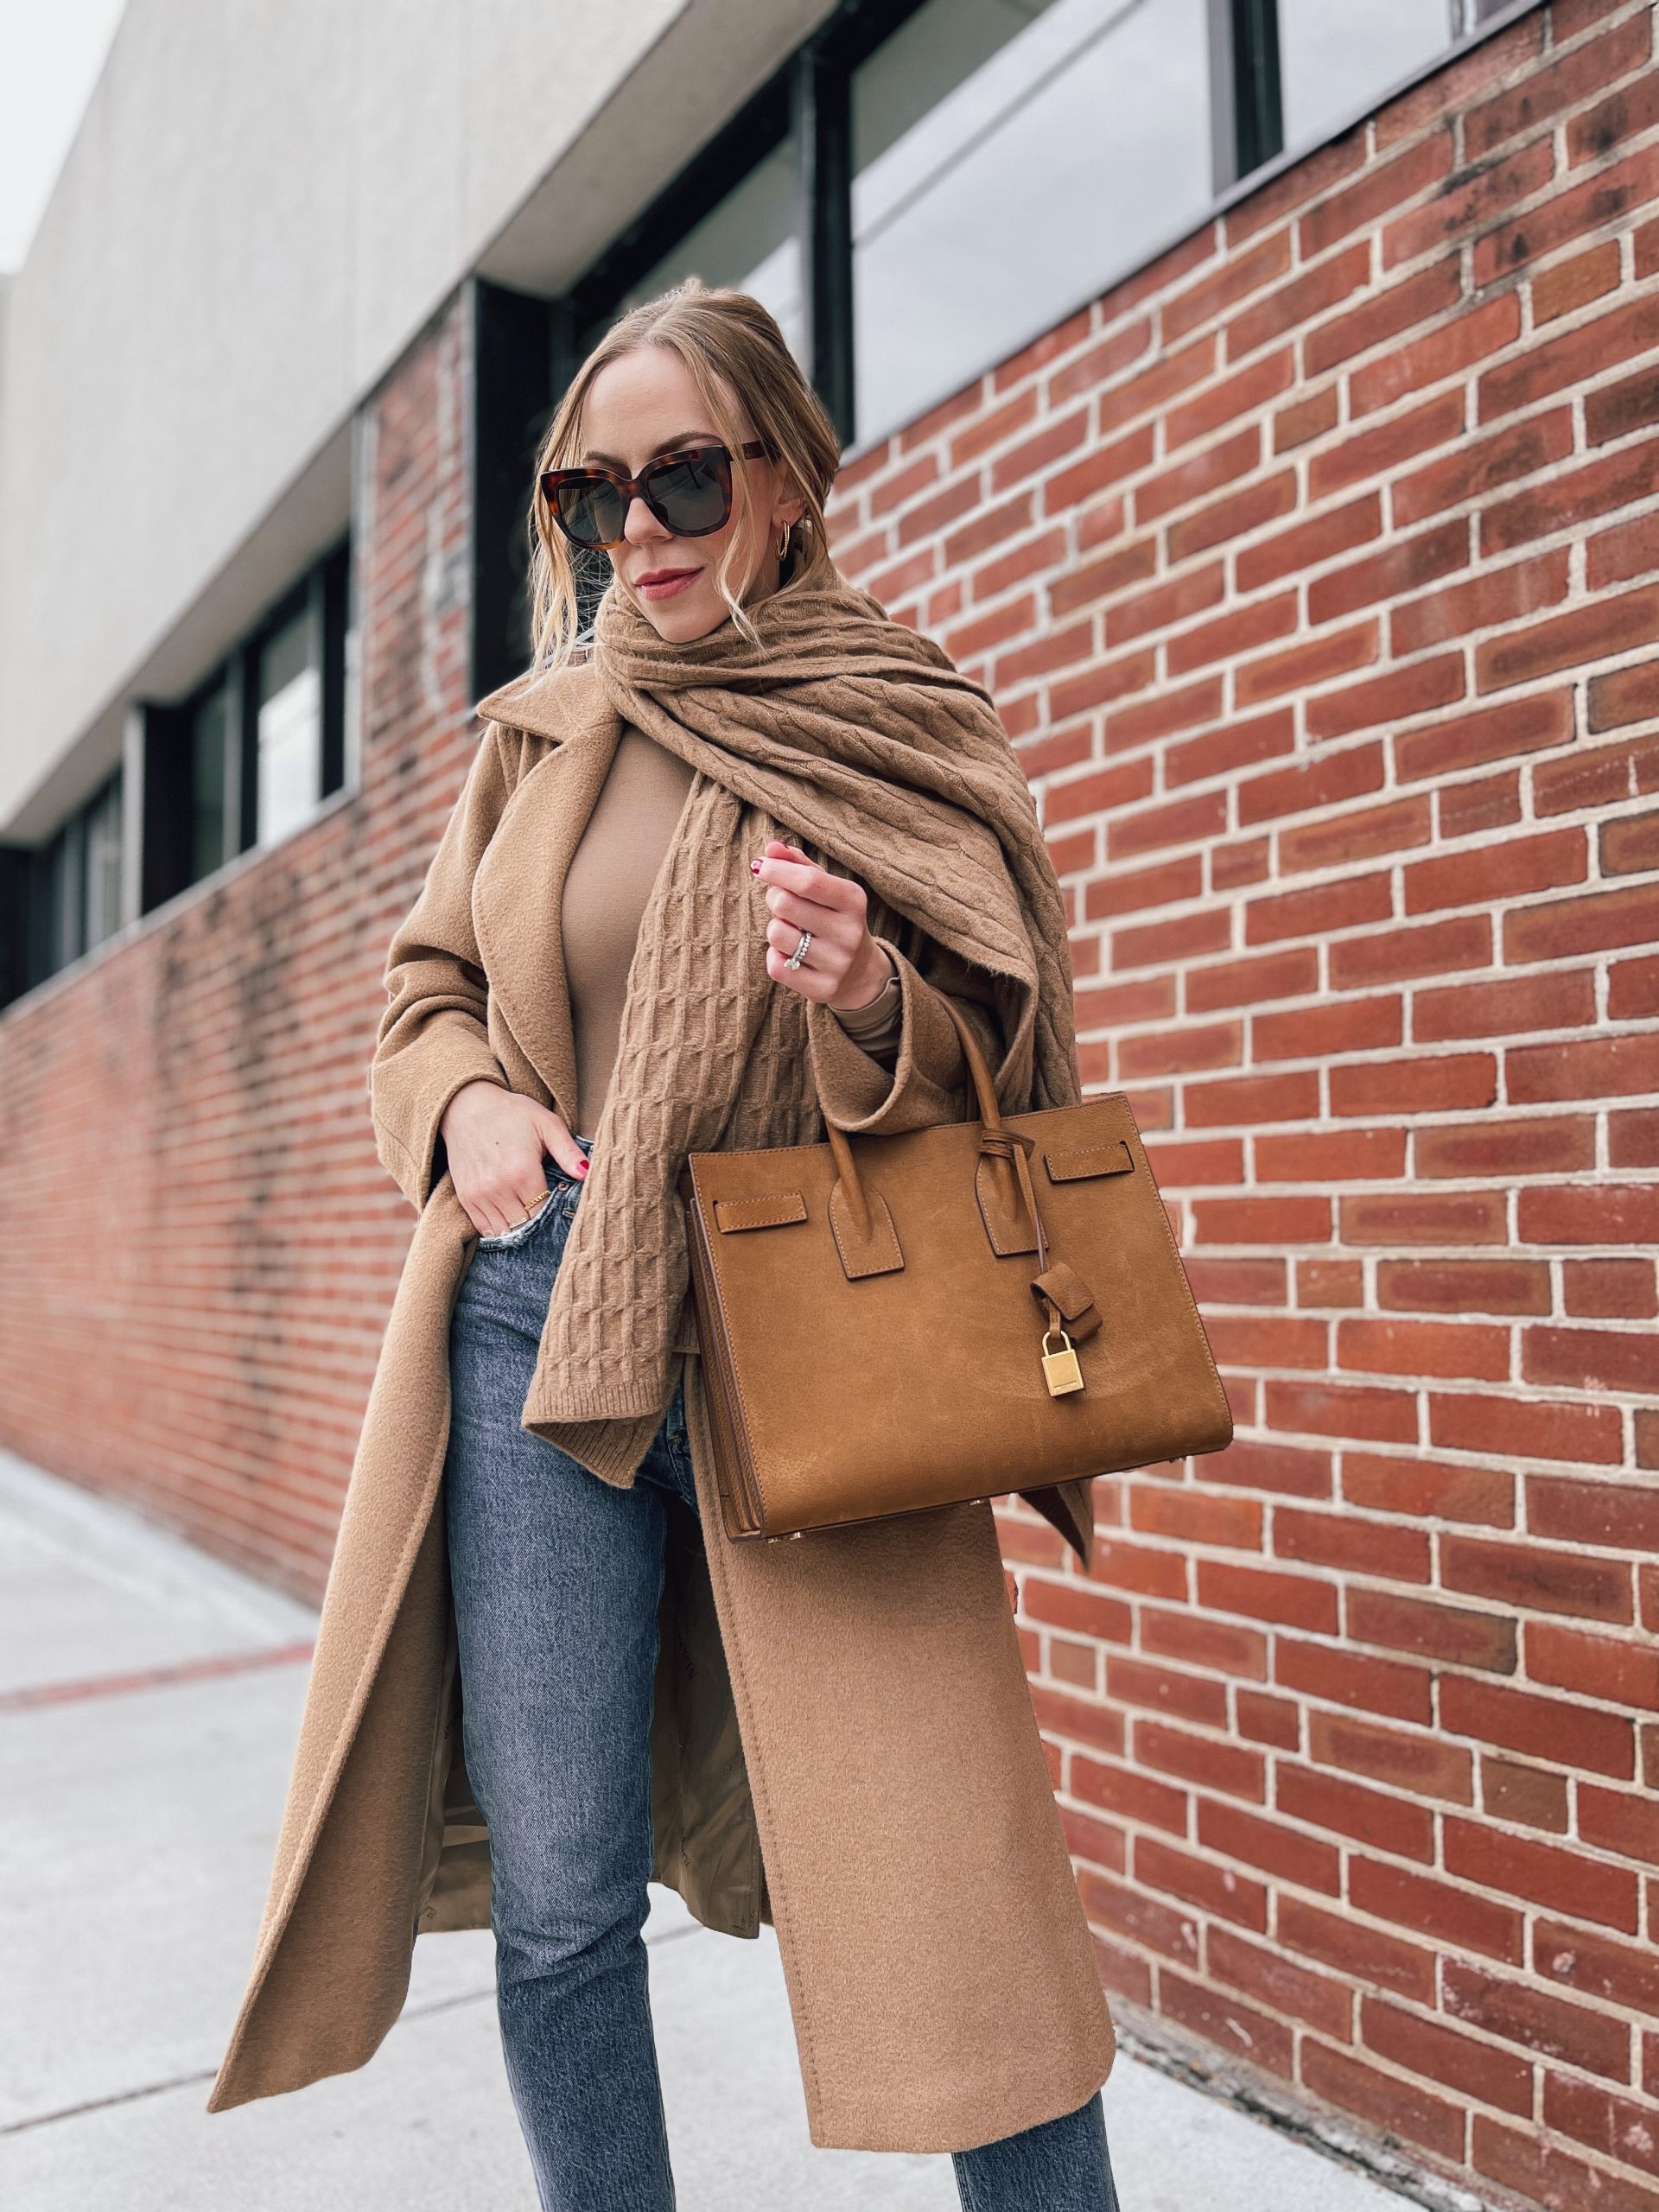 How to wear monochrome brown for winter